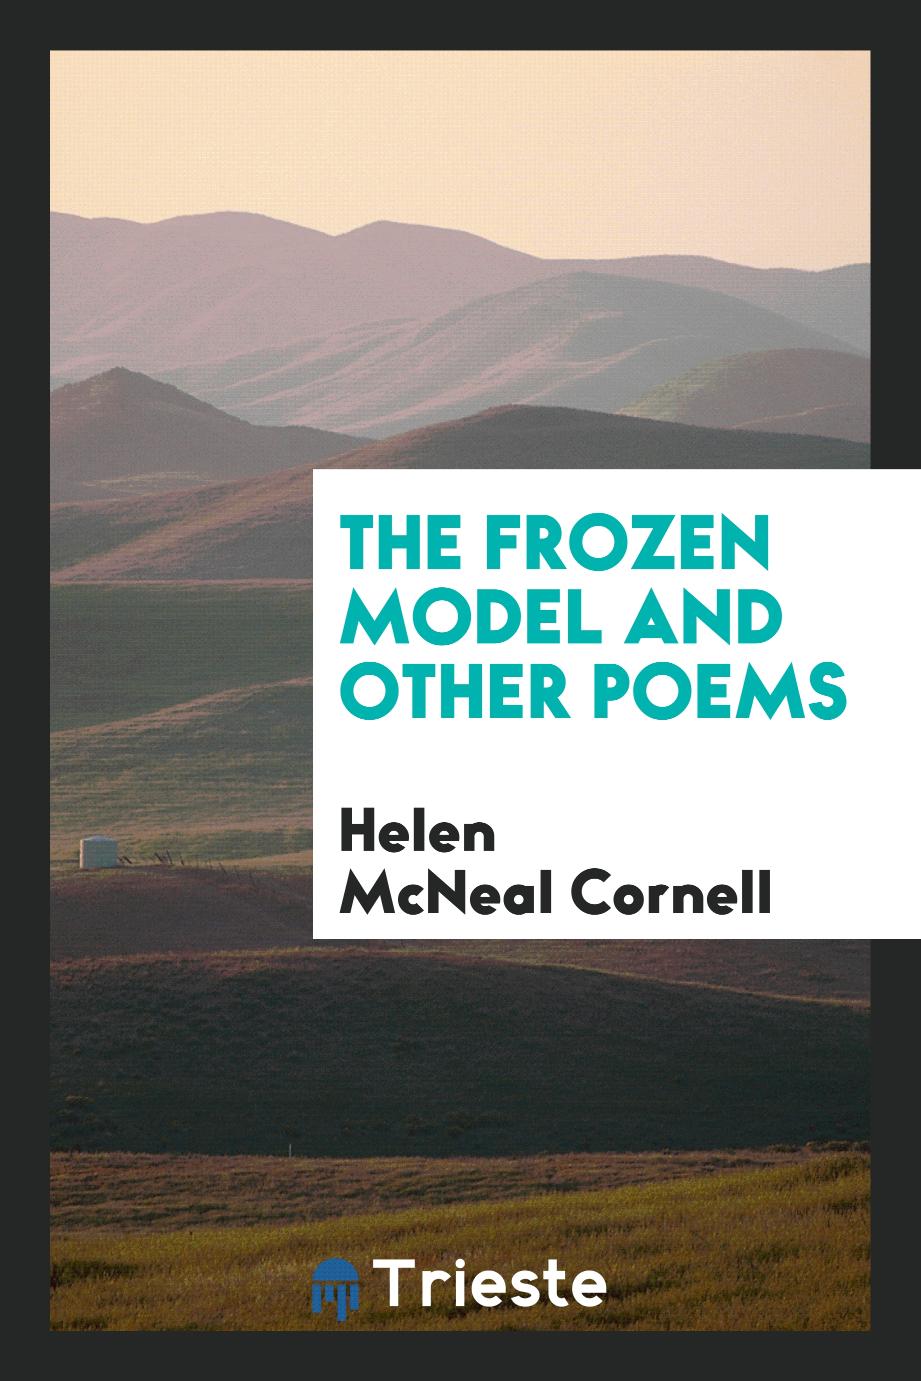 The Frozen Model and Other Poems